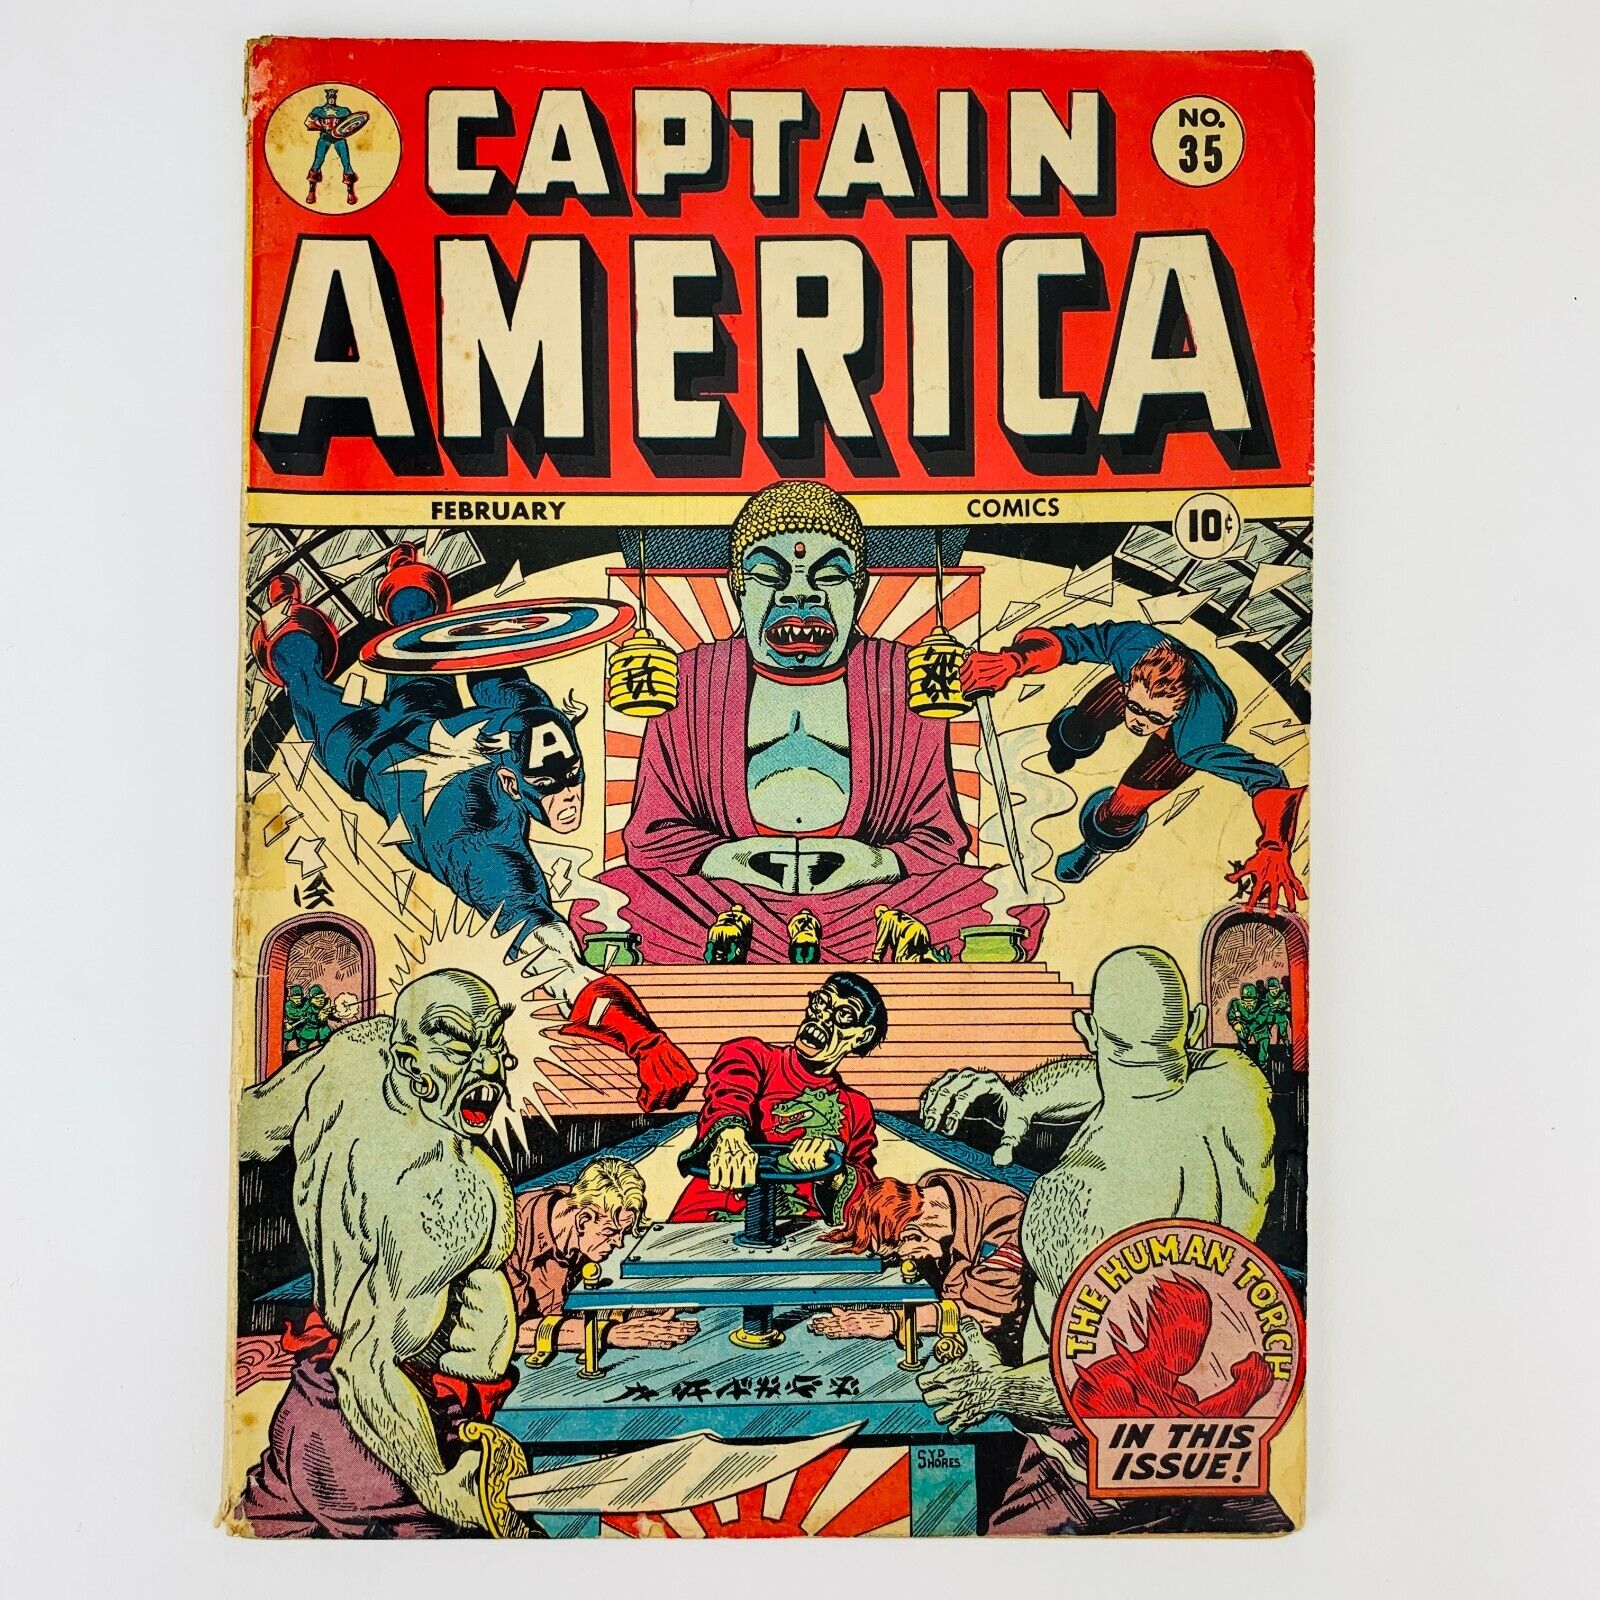 Captain America Comics 35  Timely 1944 Human Torch story  Gold Age Comic 